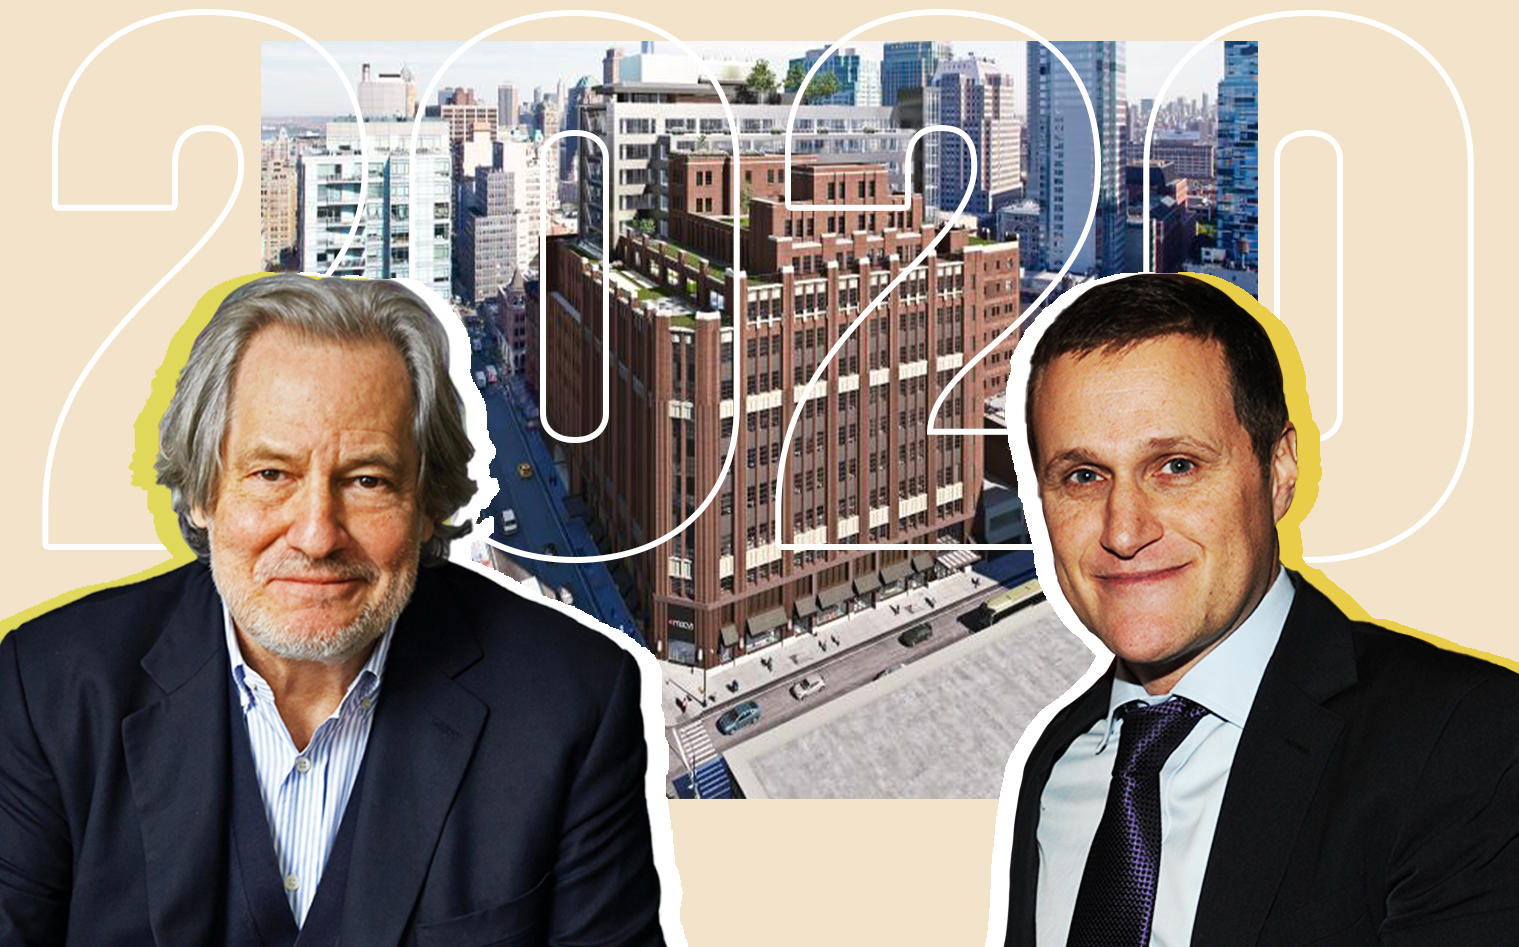 Chris Whittle and Tishman Speyer’s Rob Speyer with a rendering of The Wheeler at 181 Livingston Street (Photos via Getty Images and The Whittle School)